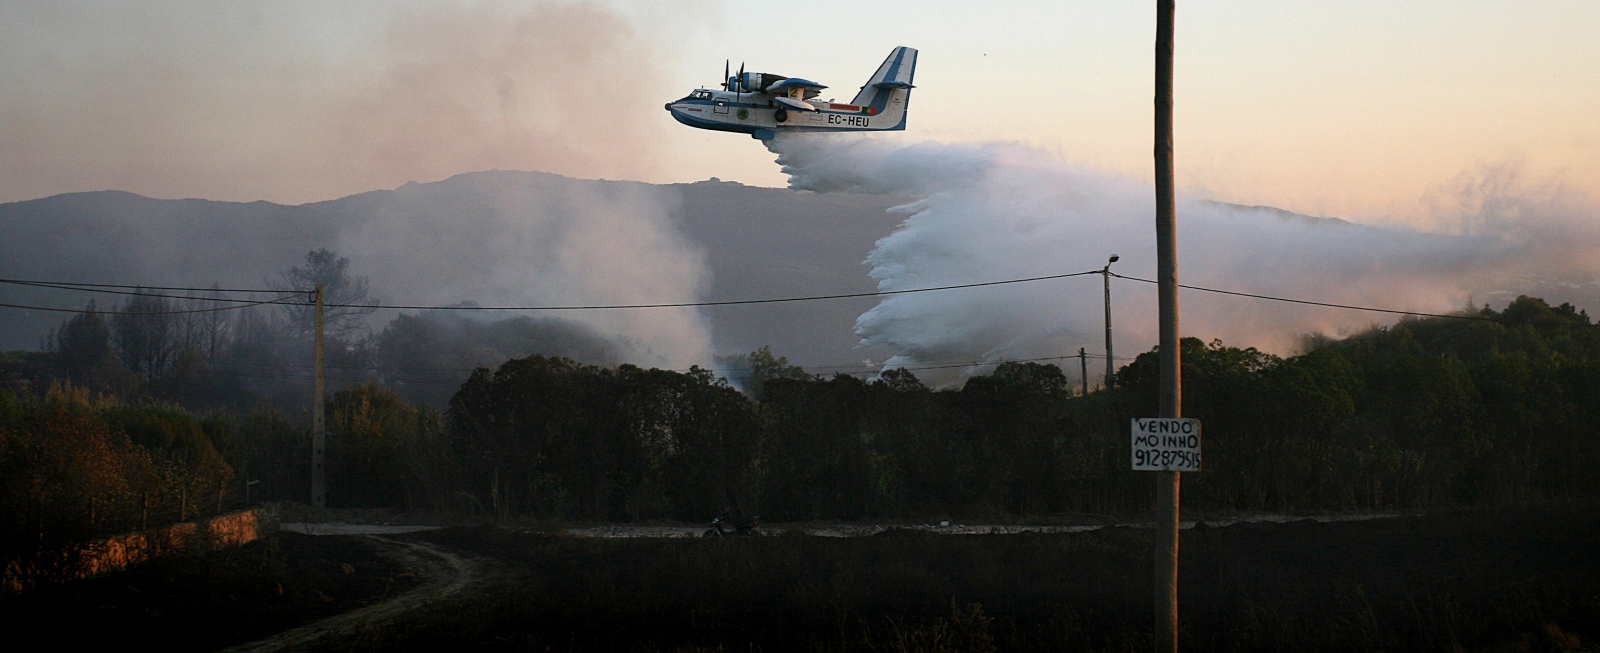 Wildfire in Sintra - 